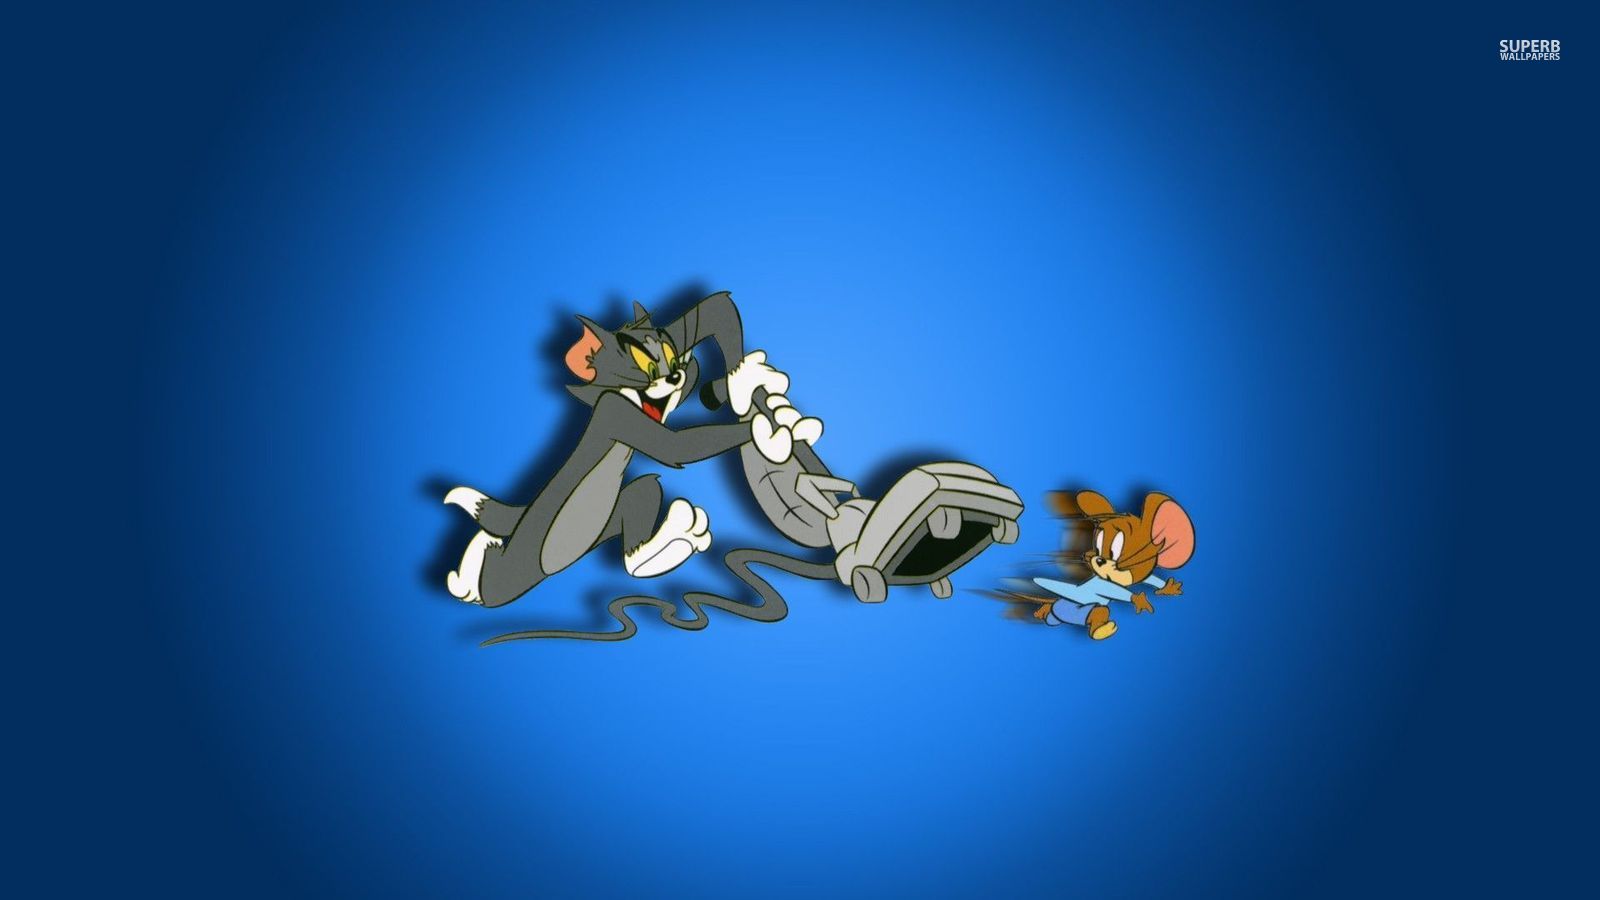 Tom and Jerry - Tom and Jerry Wallpaper (38677677) - Fanpop